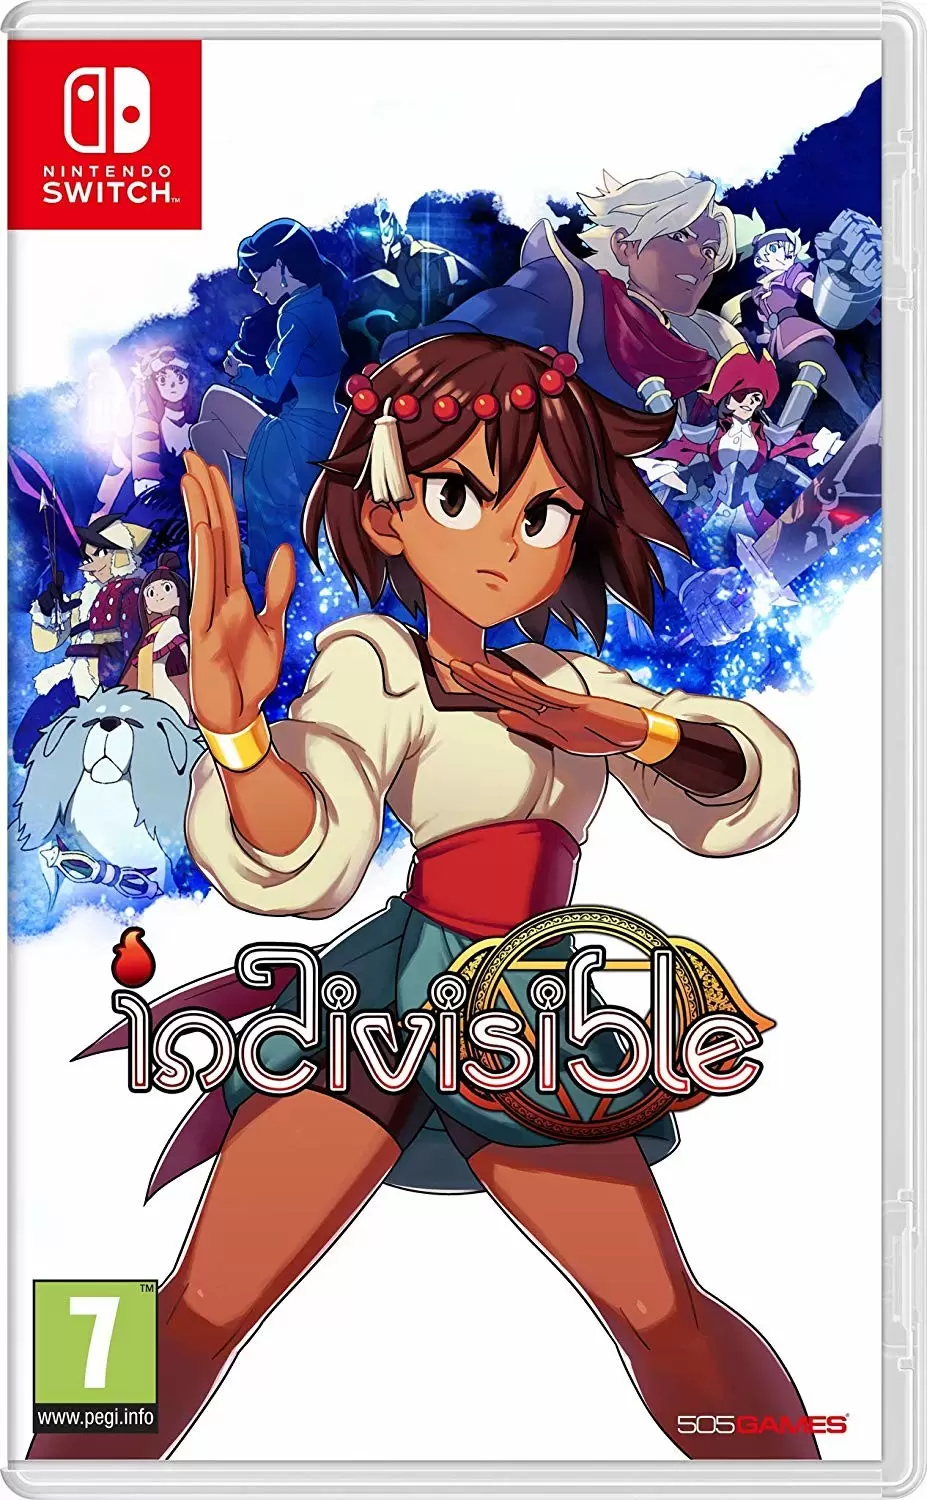 Nintendo Switch Games - Indivisible